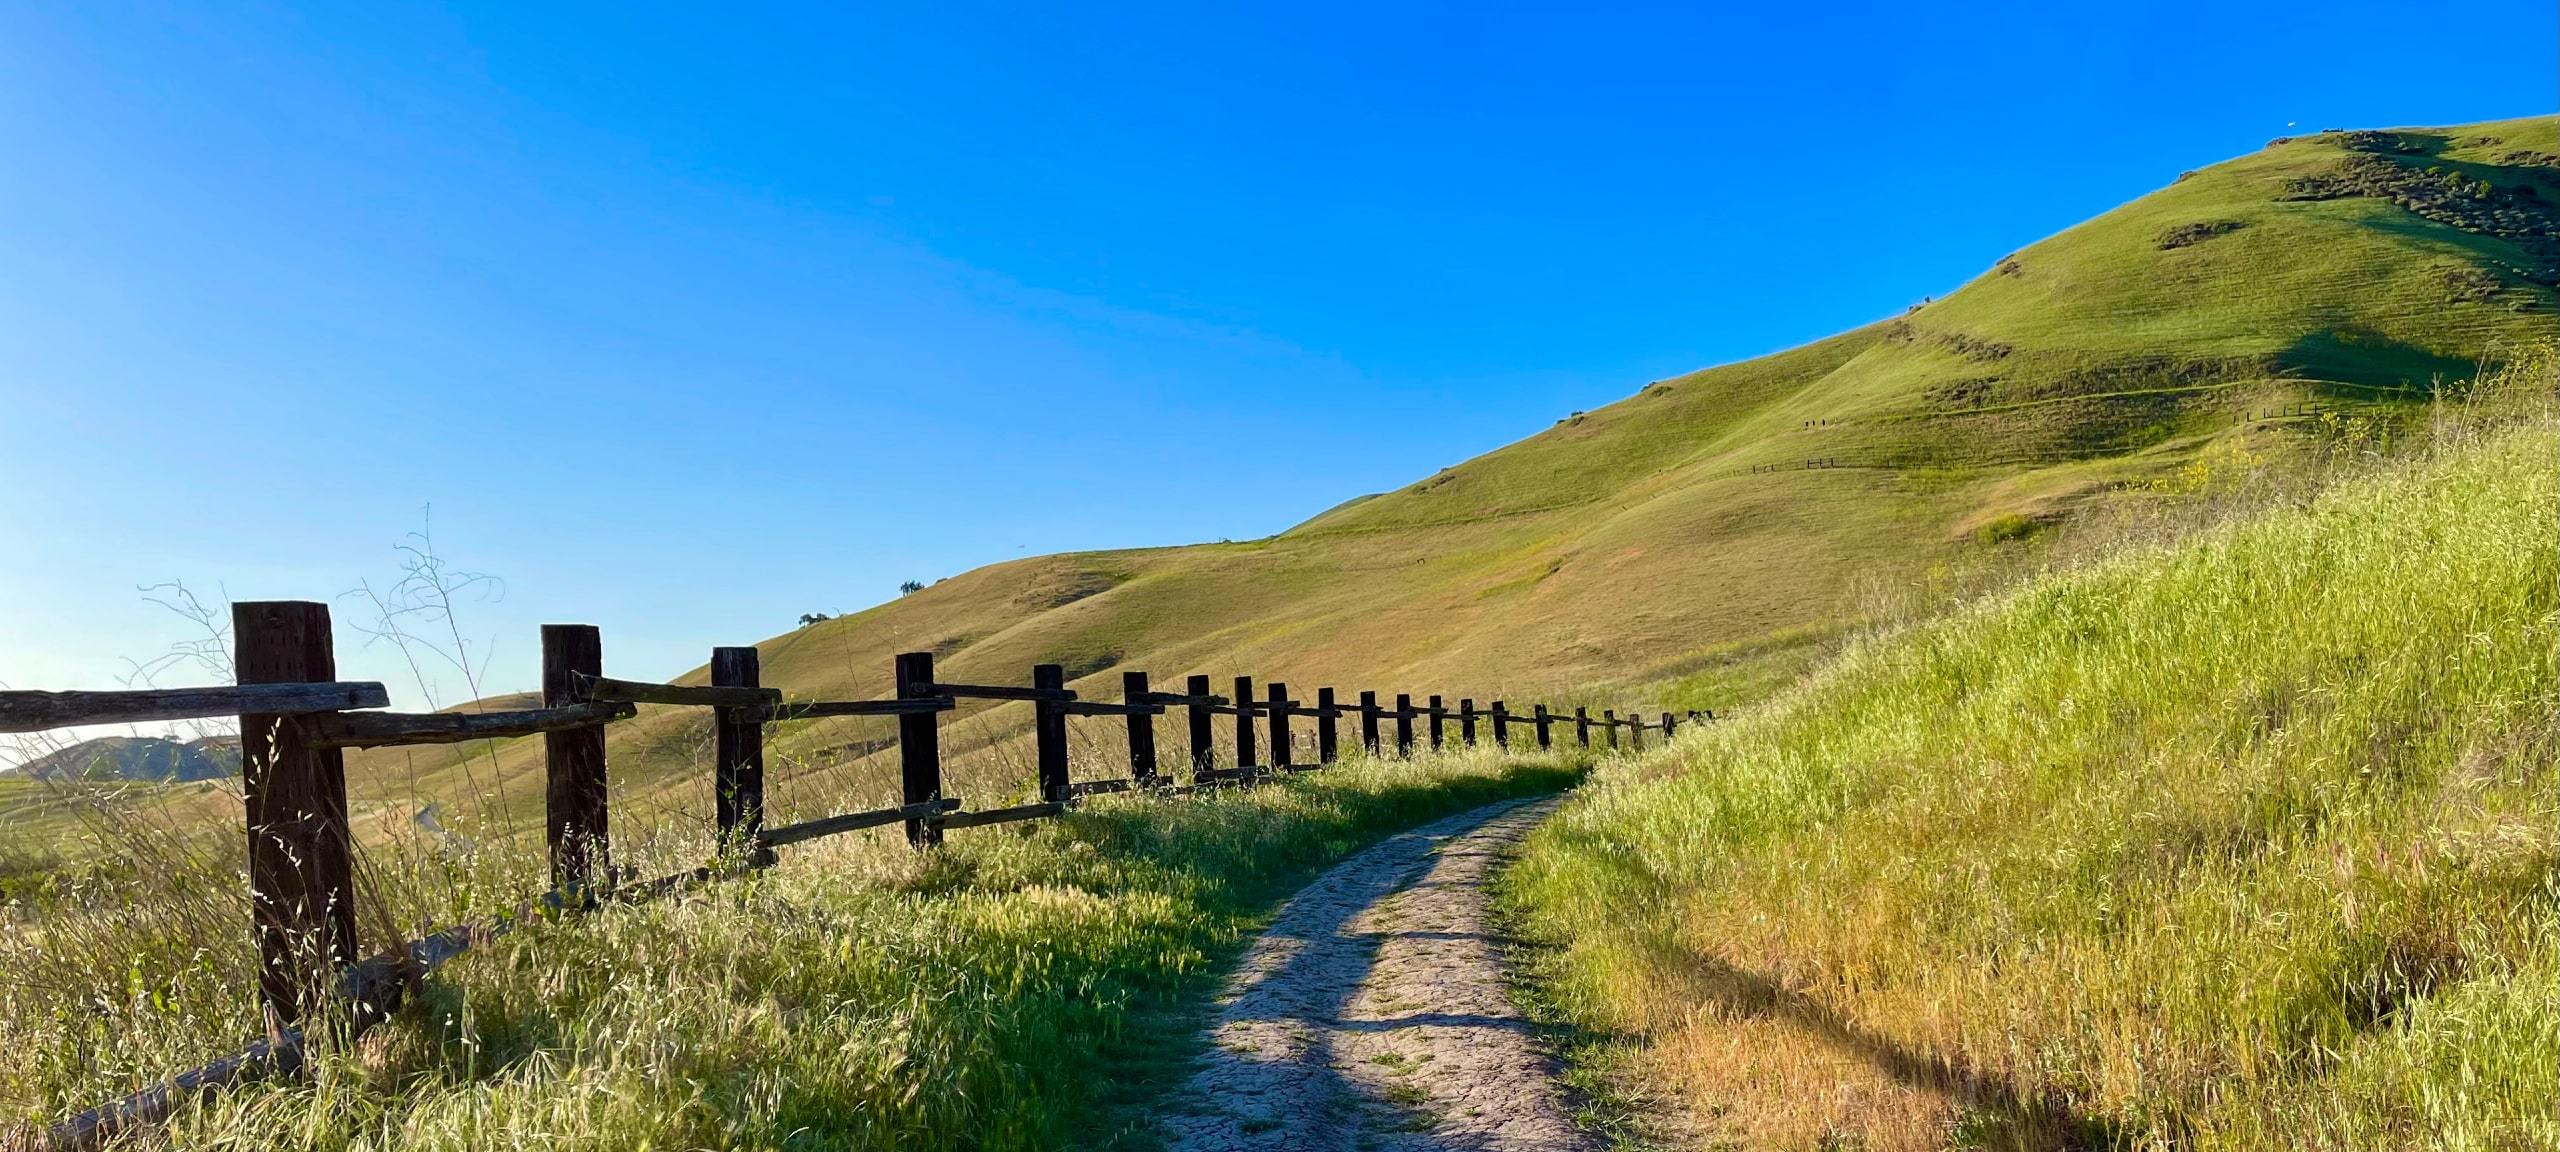 Hilly trail at Ed R. Levin County Park in Milpitas, CA